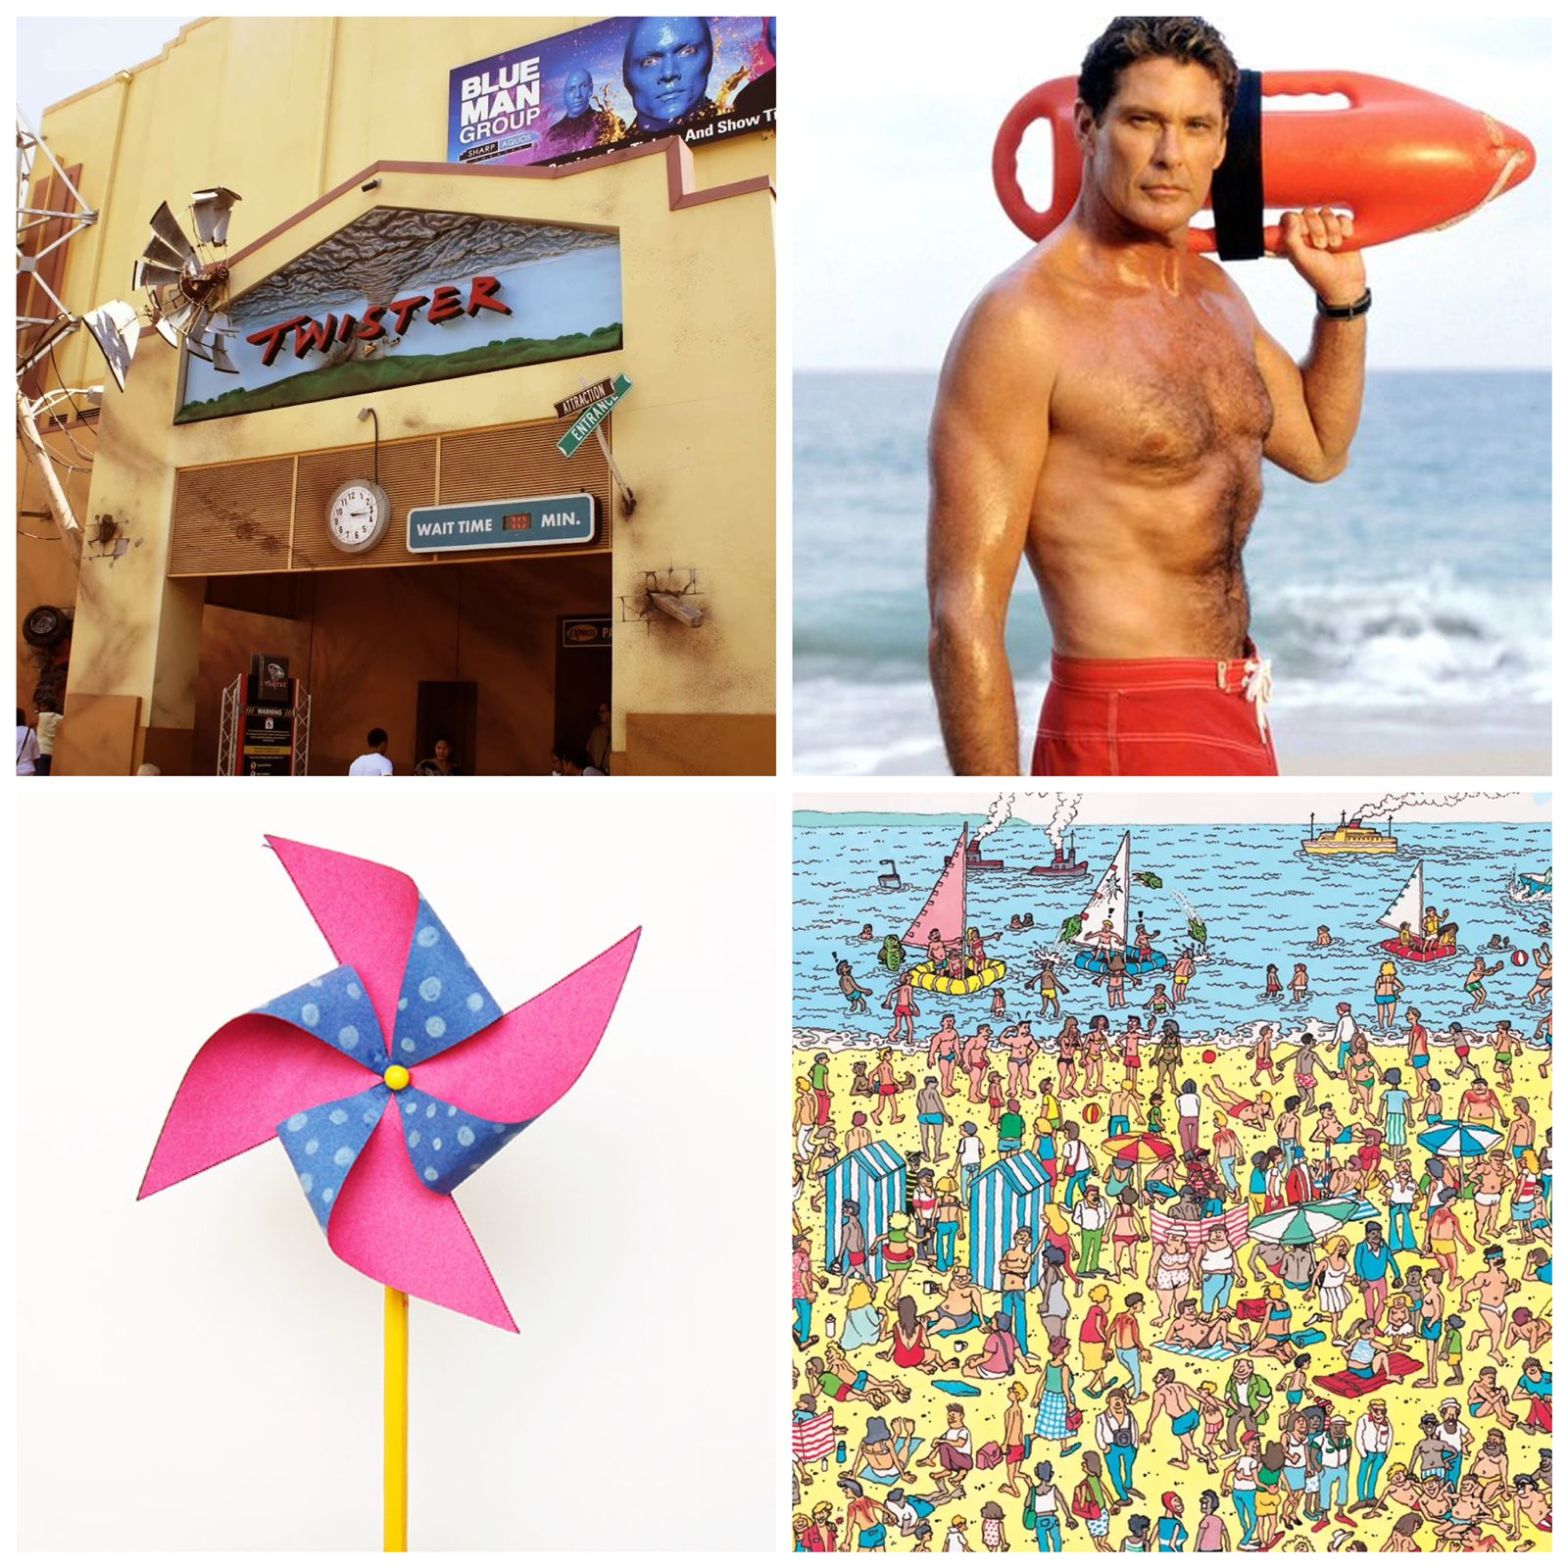 Twister - the attraction. David Hasselhoff shirtless. A pinwheel. And a Where's Waldo page.